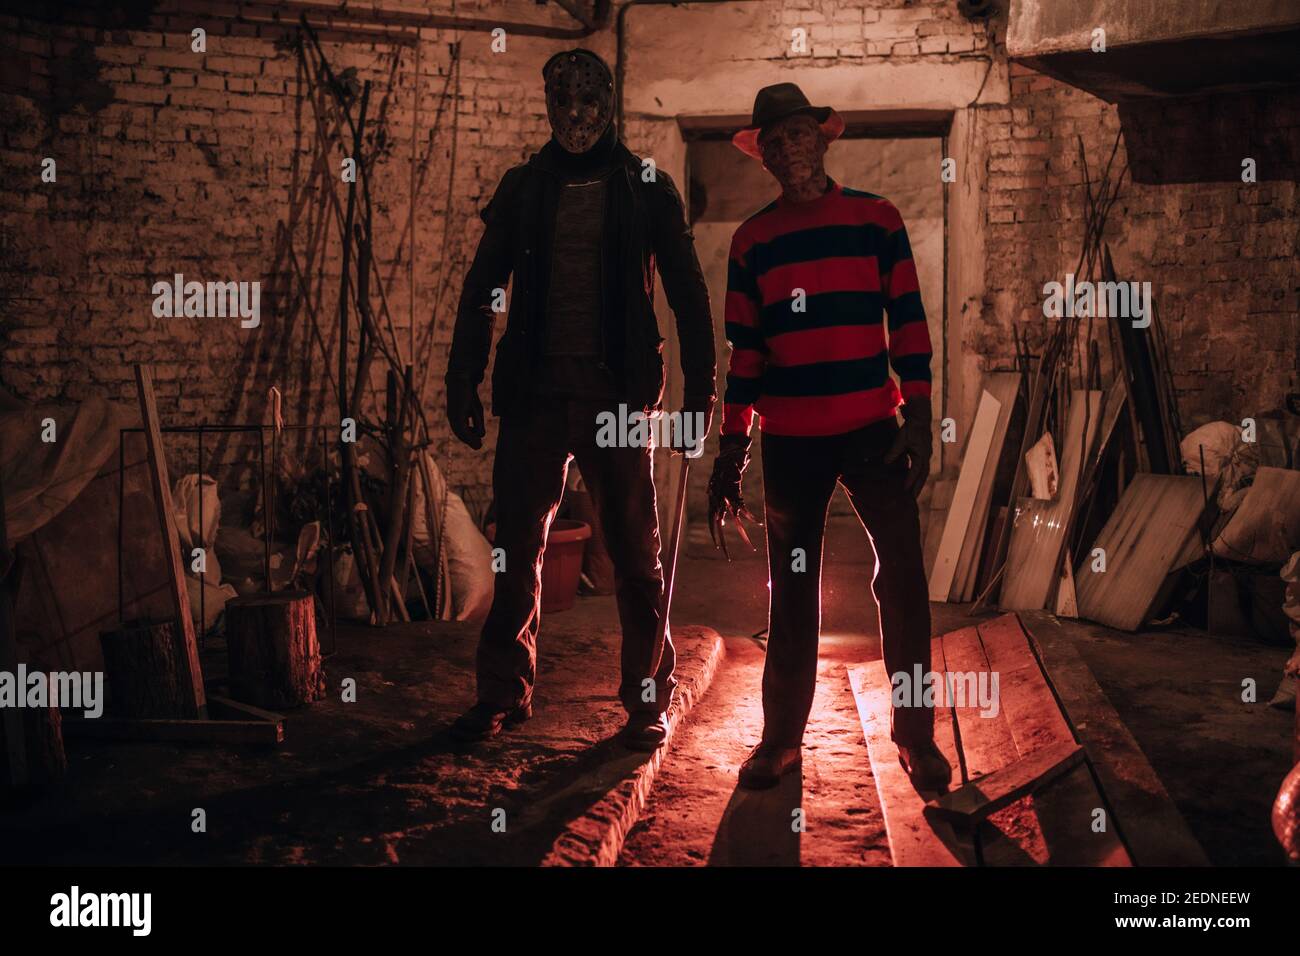 Cosplayers stand in old basement in image of Freddy Krueger and Jason Voorhees from Nightmare on Elm Street film. Stock Photo